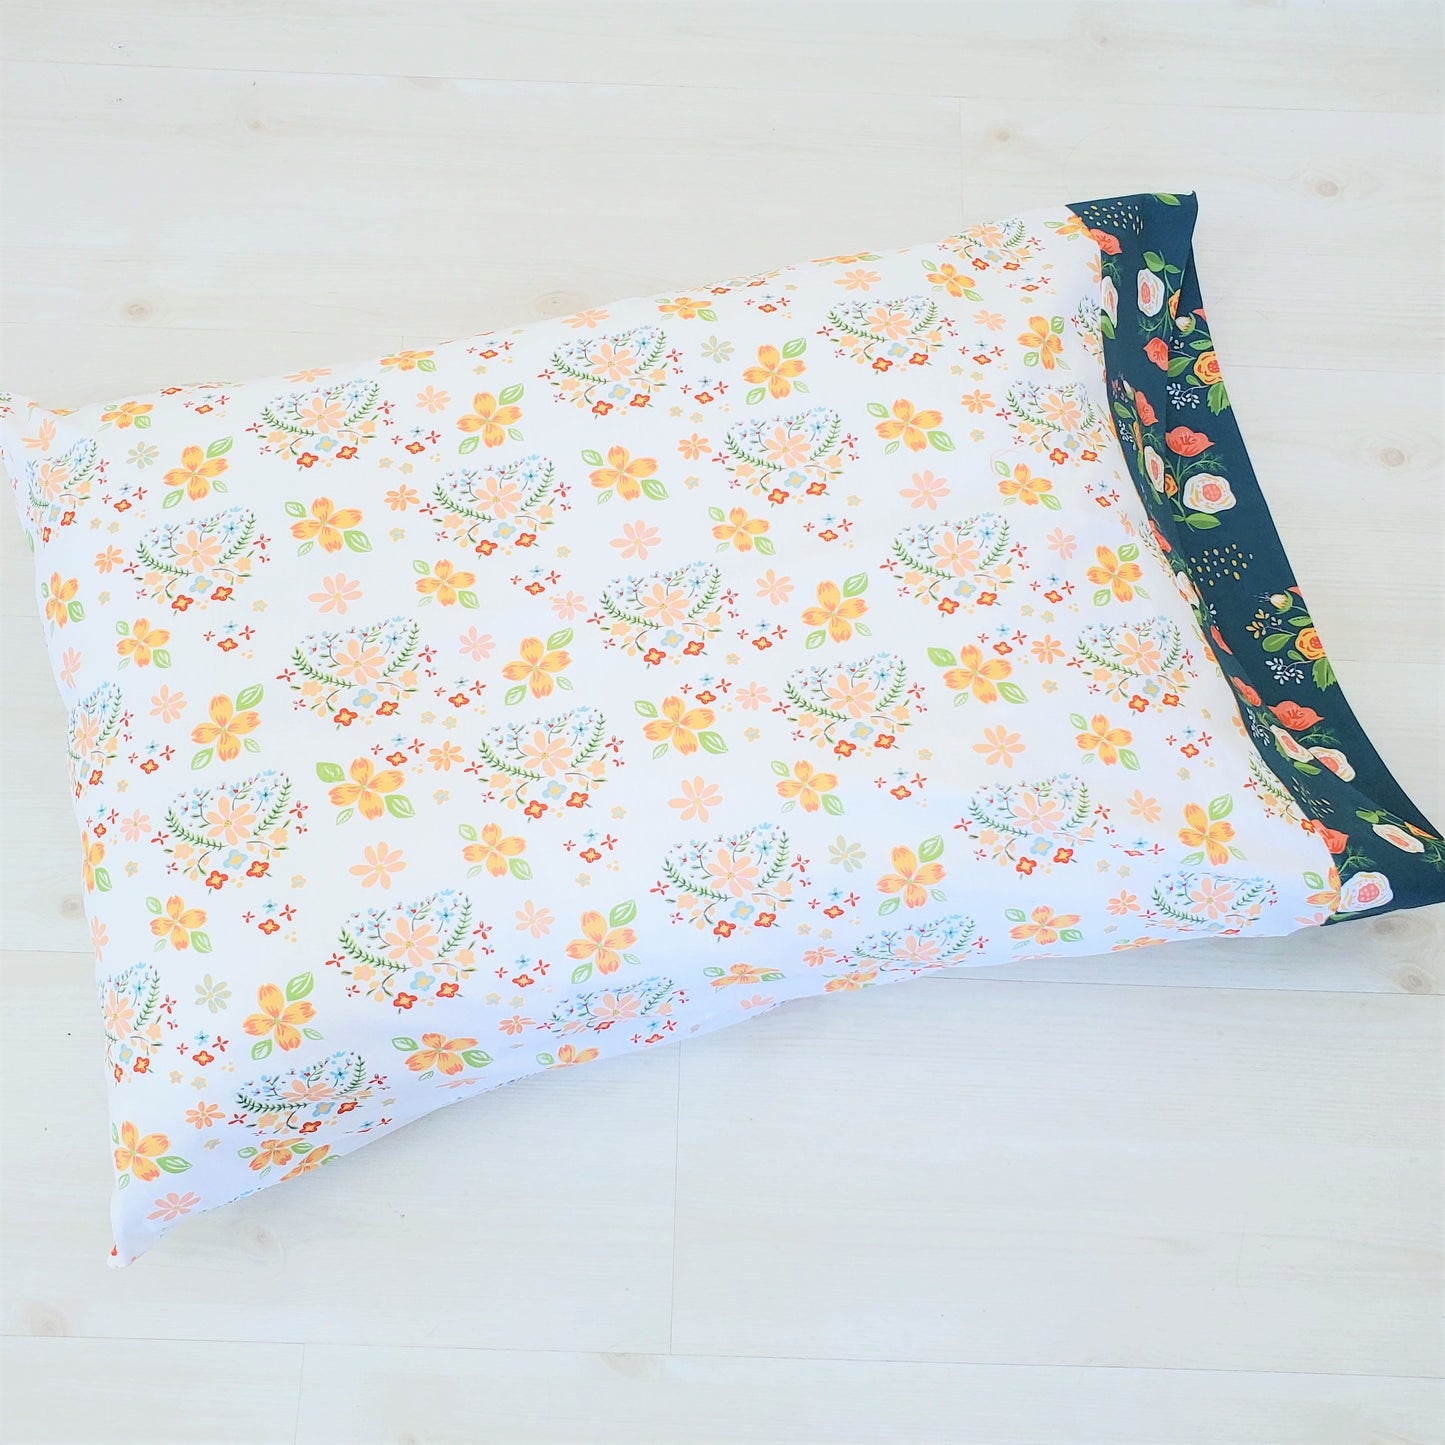 Organic Cotton Pillowcases in Floral Heart Print